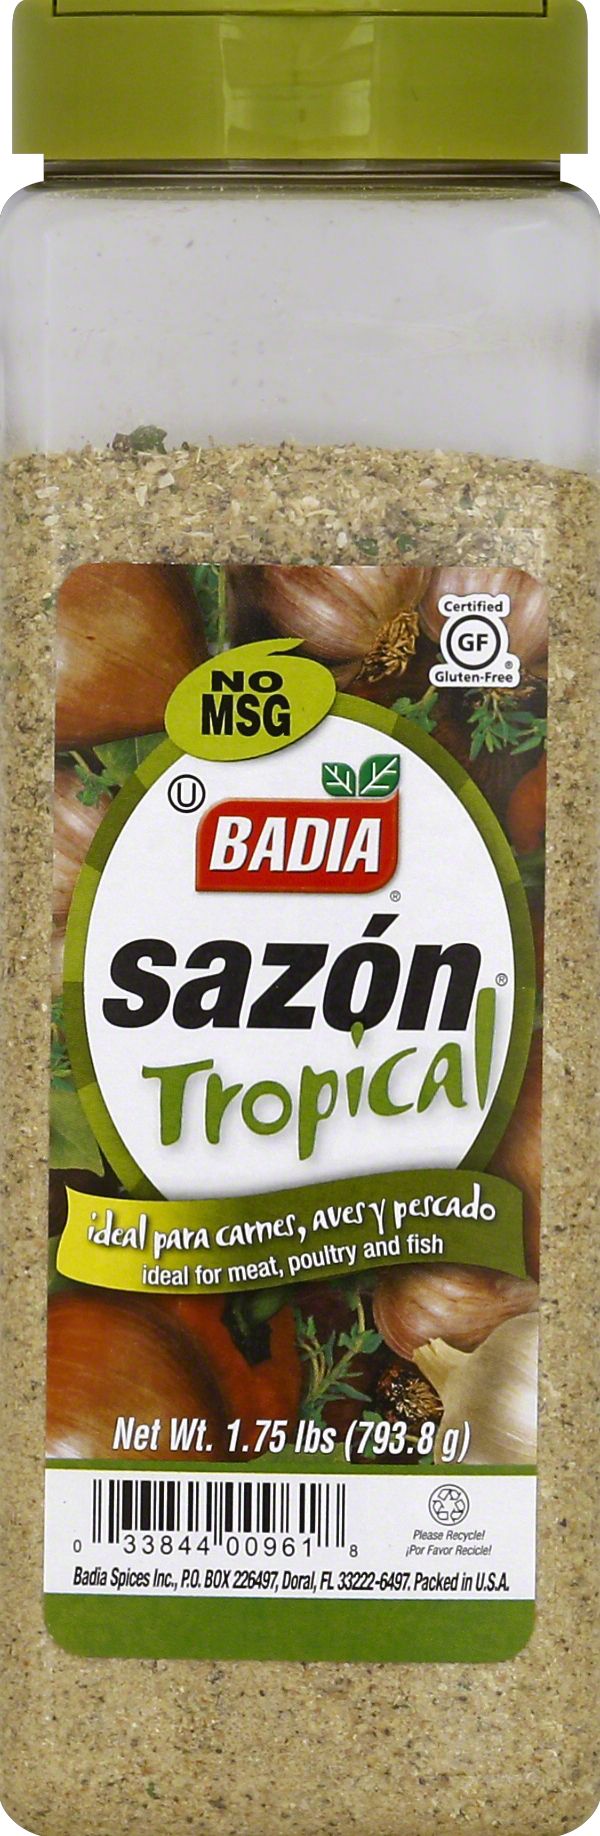 Buy Badia: Complete Seasoning, 9 Oz Online, Bulk Herbs & Spices for Sale  at Wholesale Prices